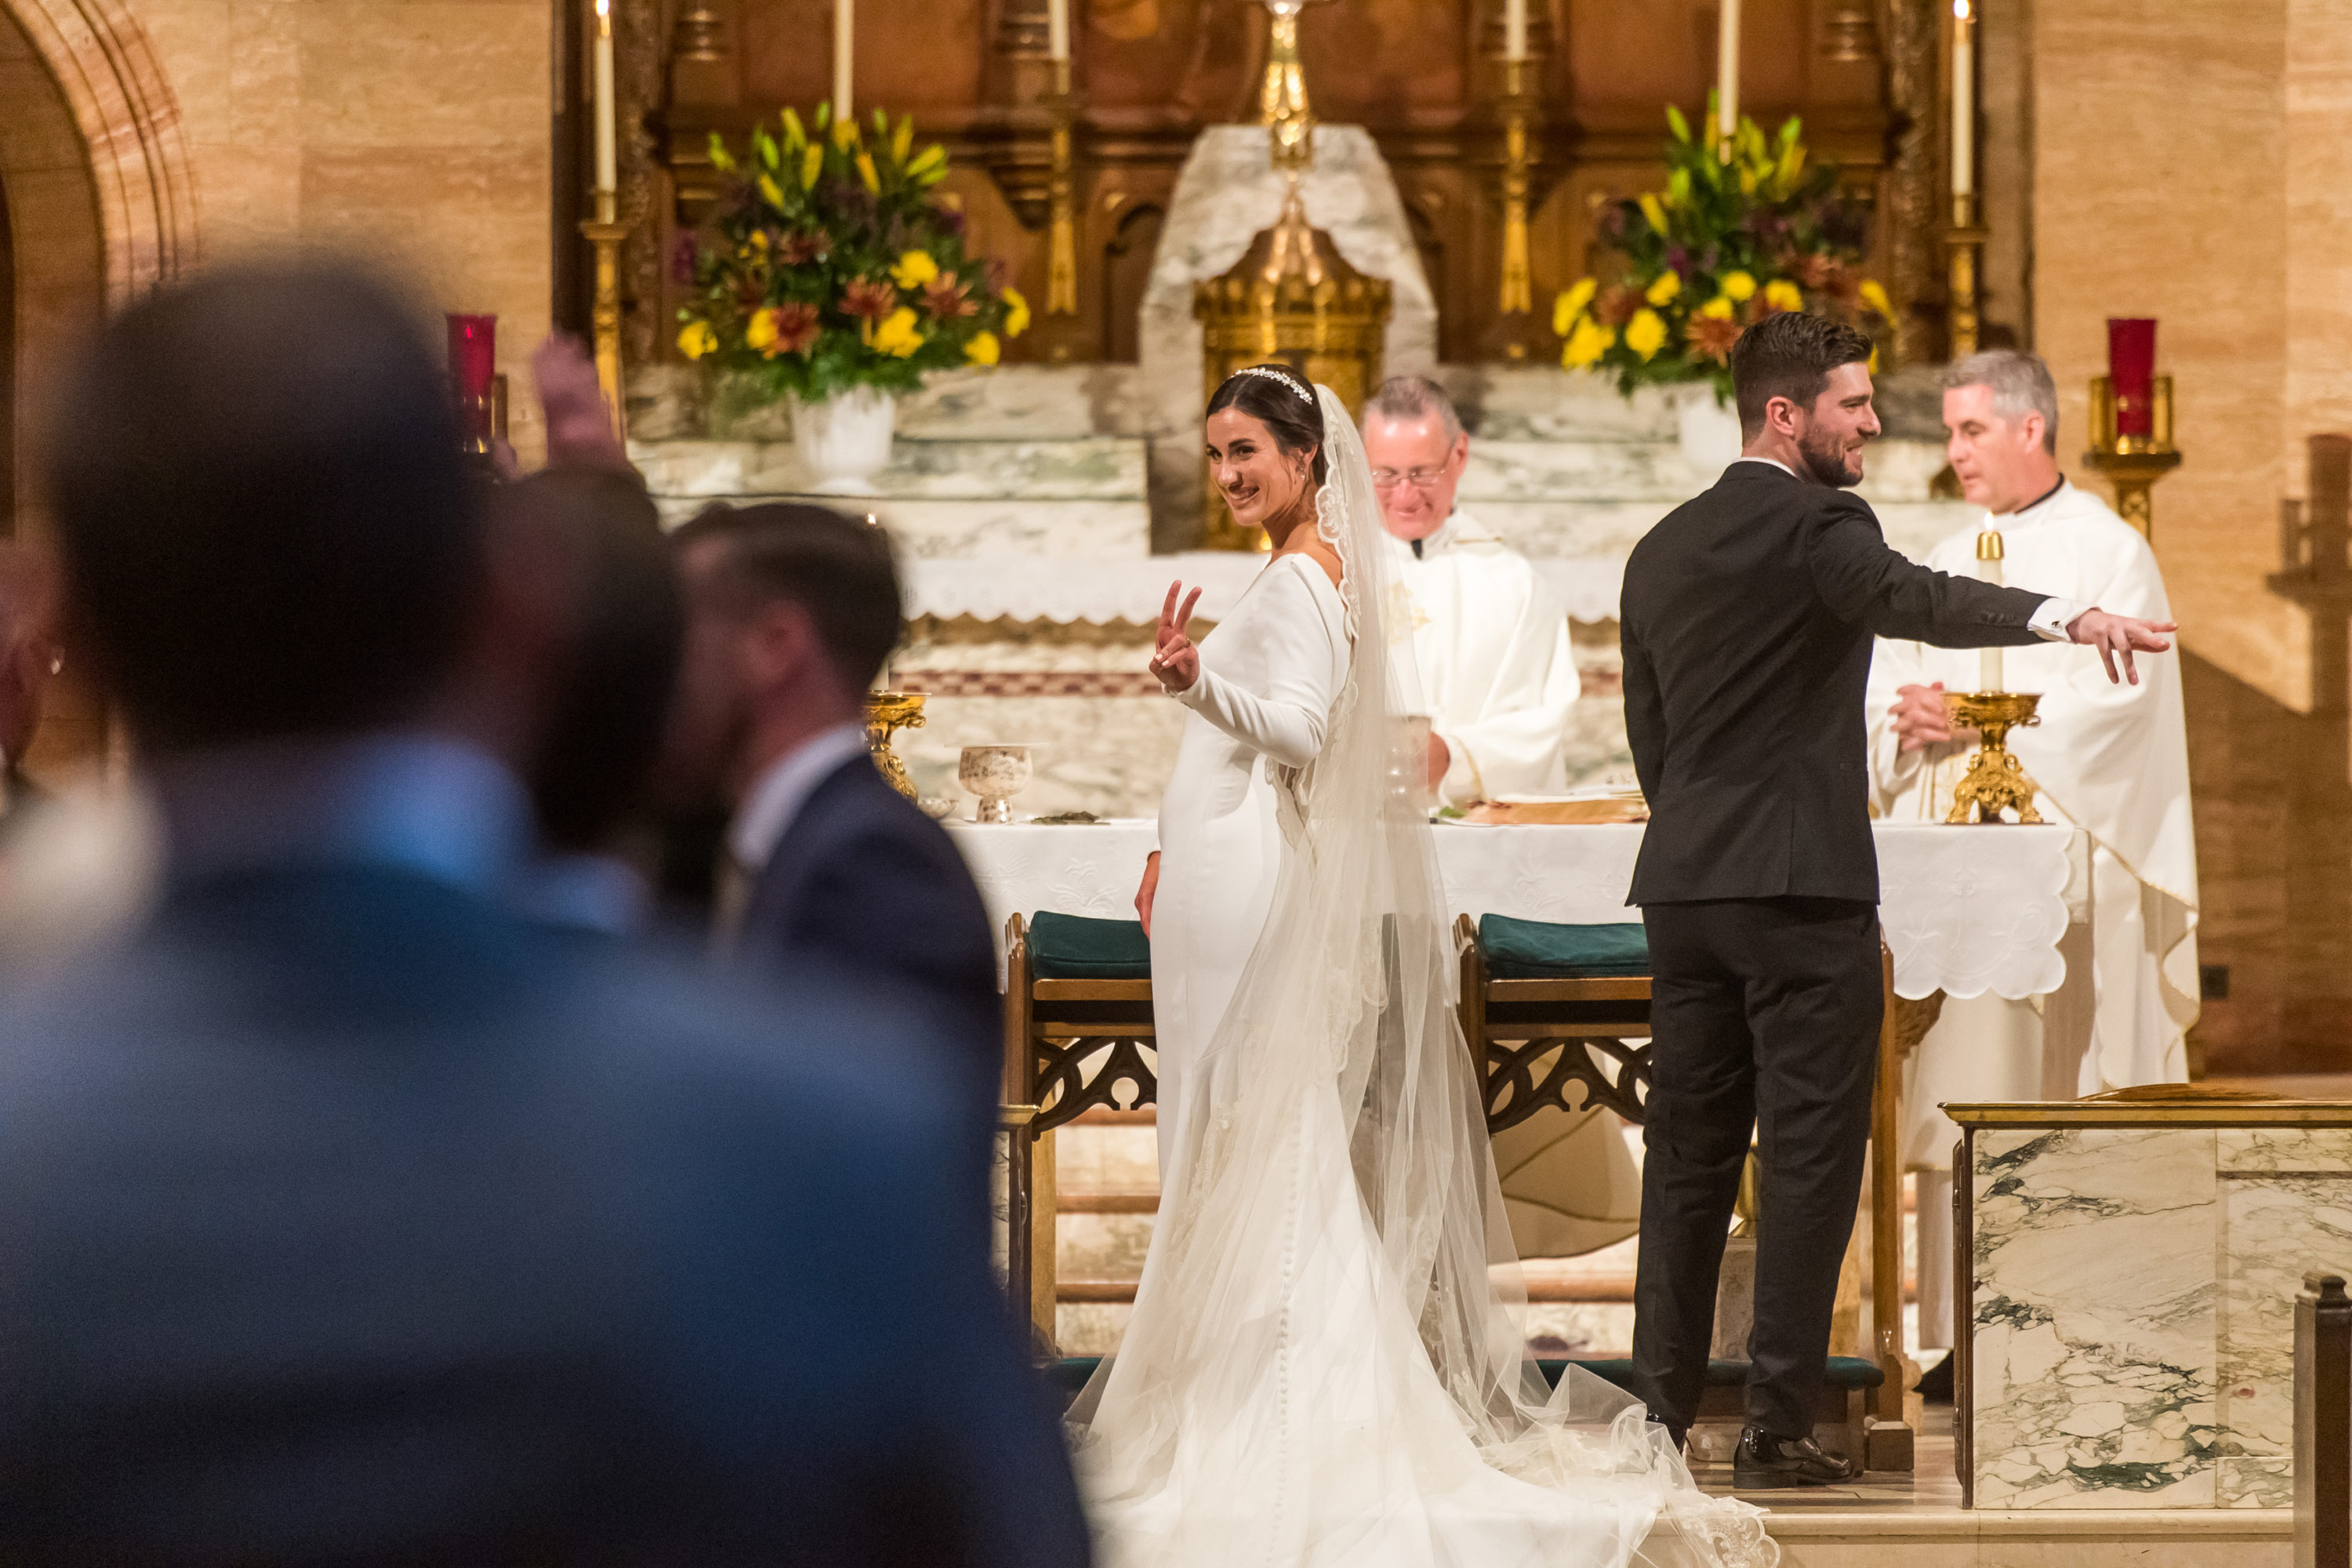 Bride flashes sign of peace during her wedding at Holy Ghost Church in Denver, Colorado.